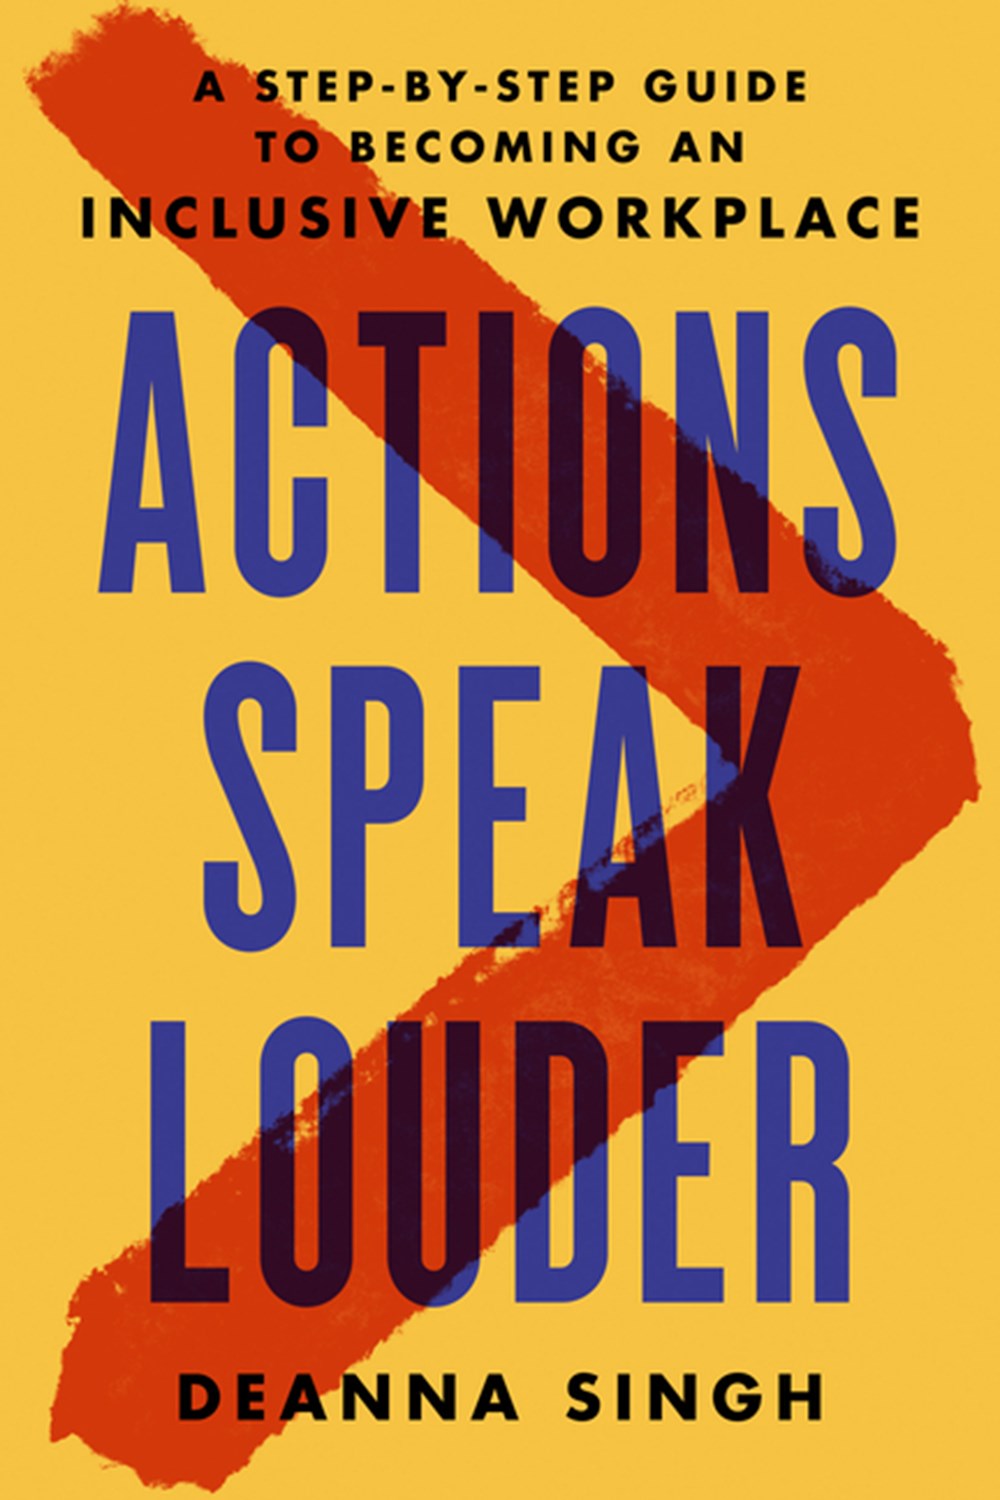 Actions Speak Louder A Step-By-Step Guide to Becoming an Inclusive Workplace